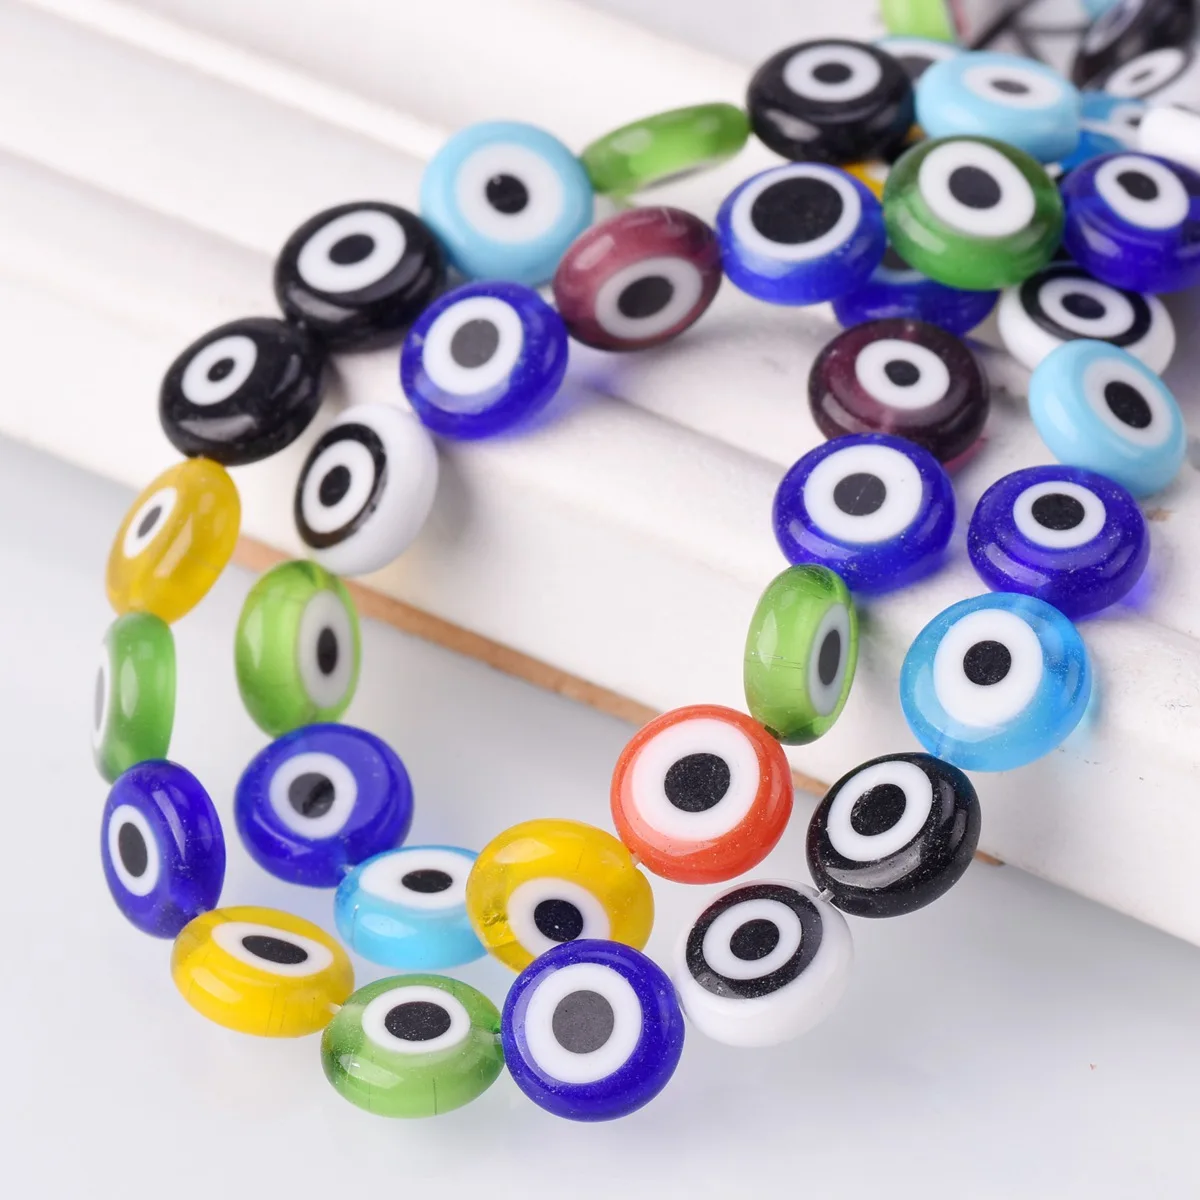 6mm 8mm 10mm 12mm Mixed Flat Round Evil Eye Millefiori Lampwork Glass Beads For Jewelry Making DIY Crafts Findings